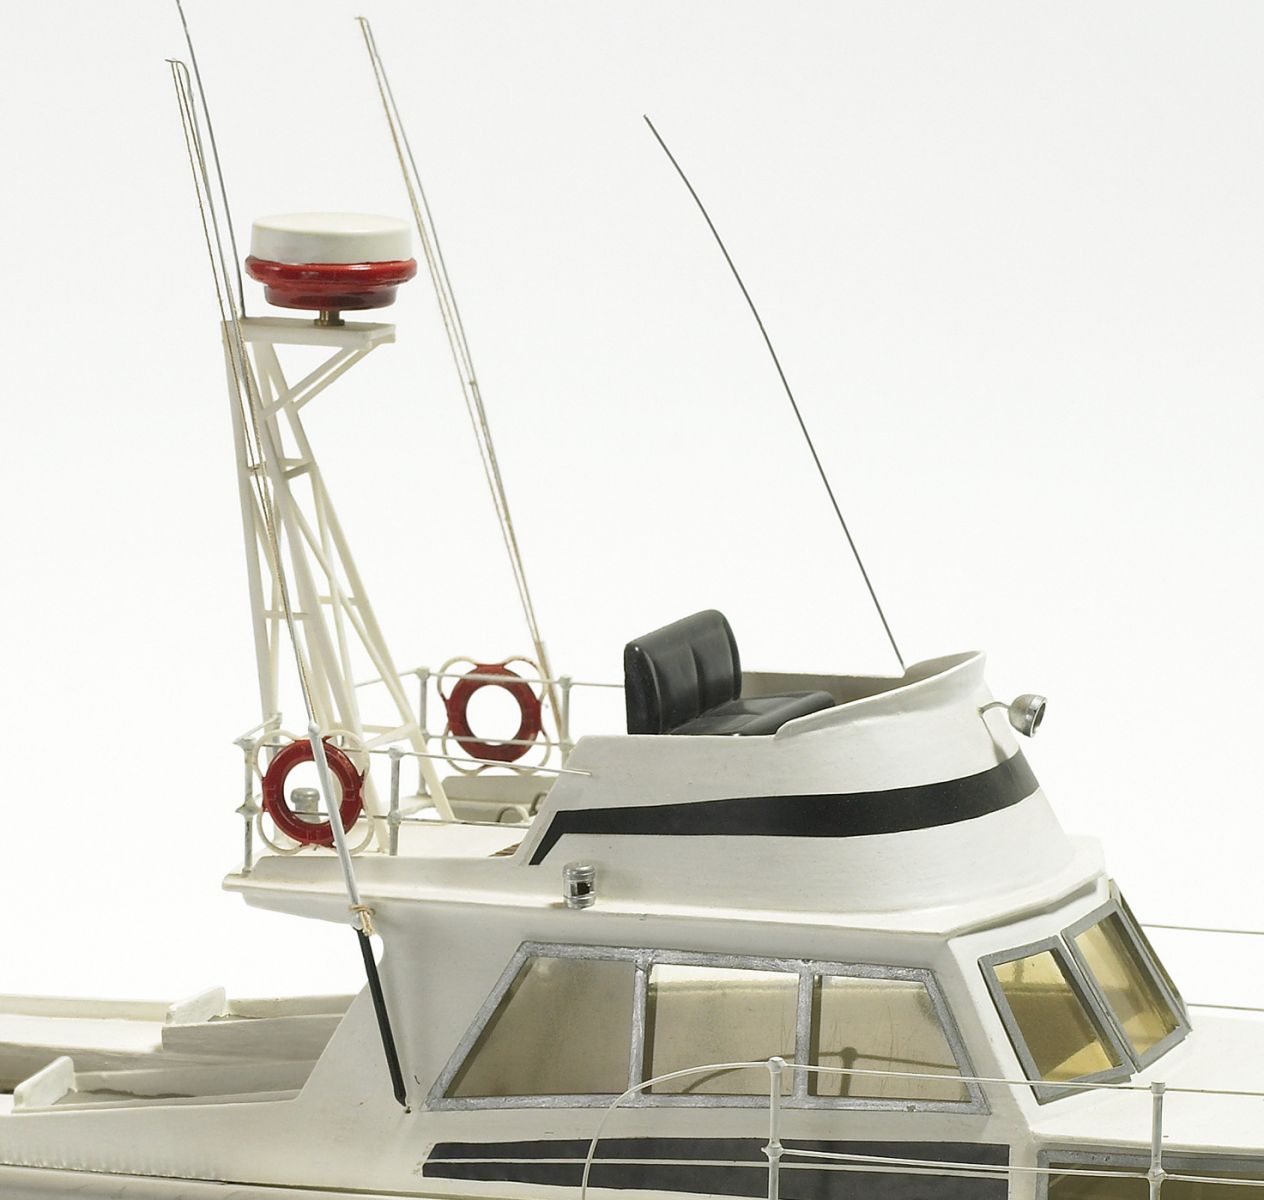 At your request this model boat can be delivered ready assembled. The 